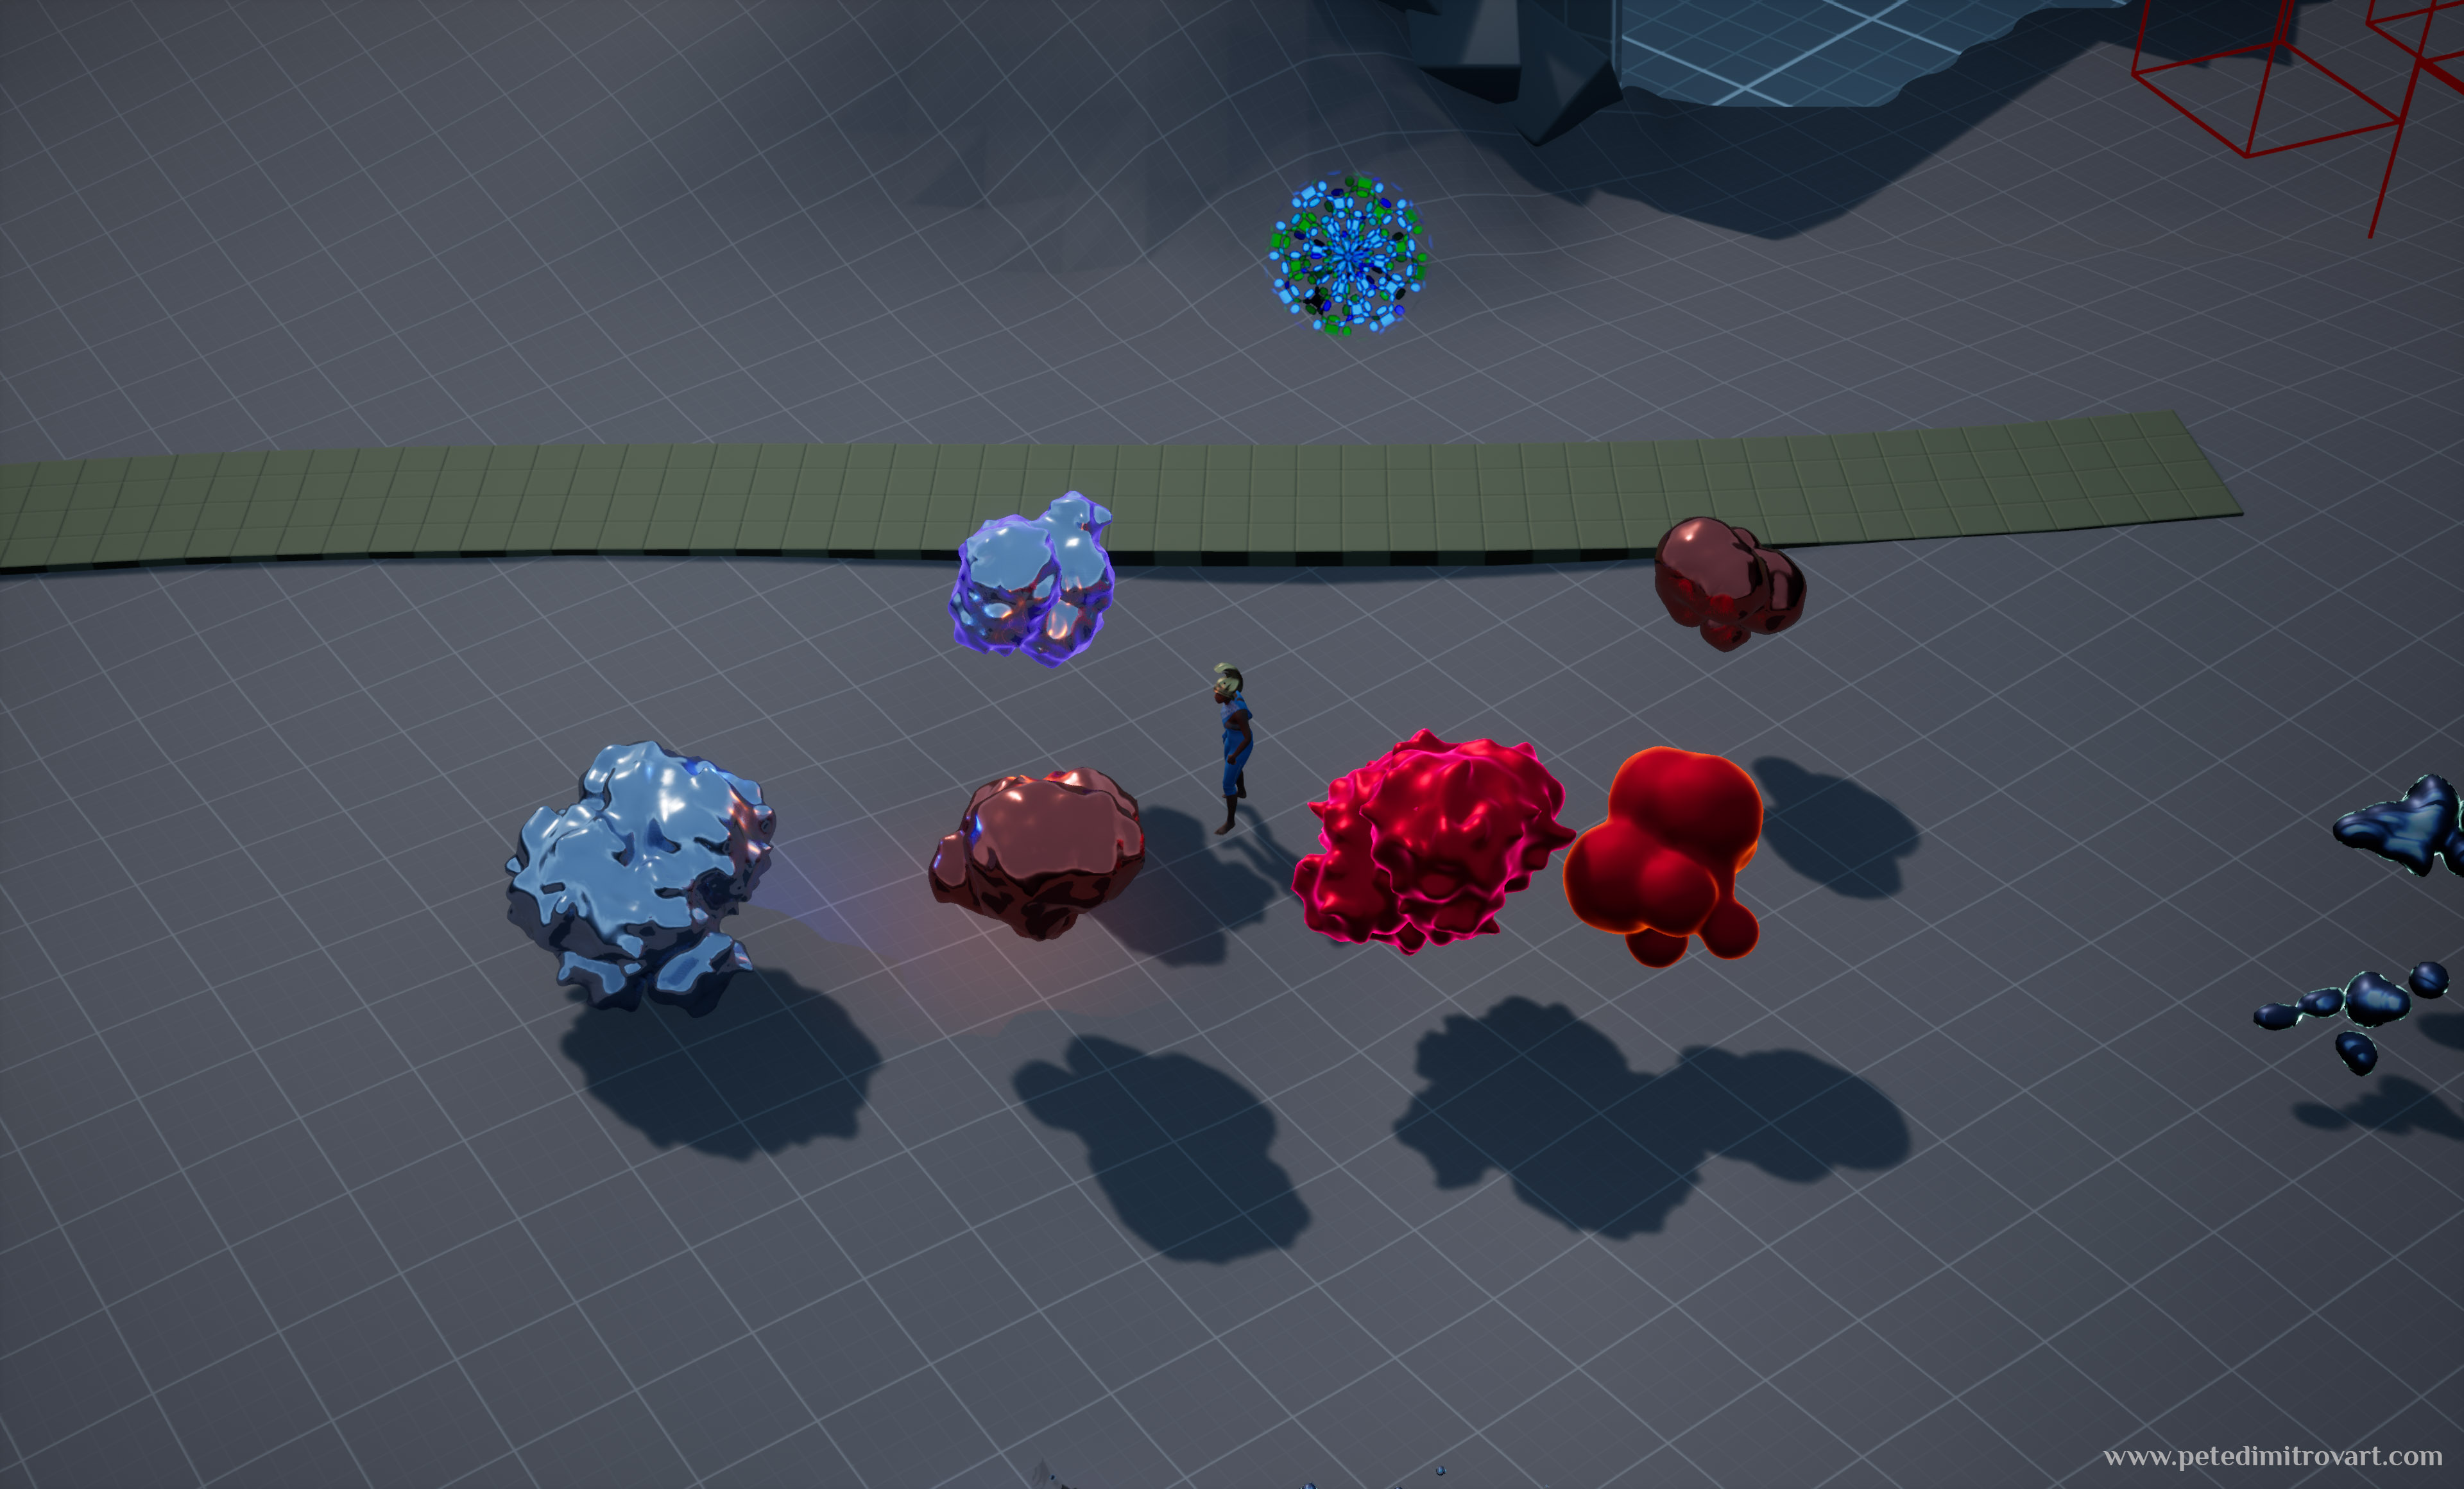 Another screenshot from the prototype. The player character is in the middle and around them are floating orbs. Some are smooth and red in appearance. Like blood. Other copper and blue silver, looking like liquid metal.